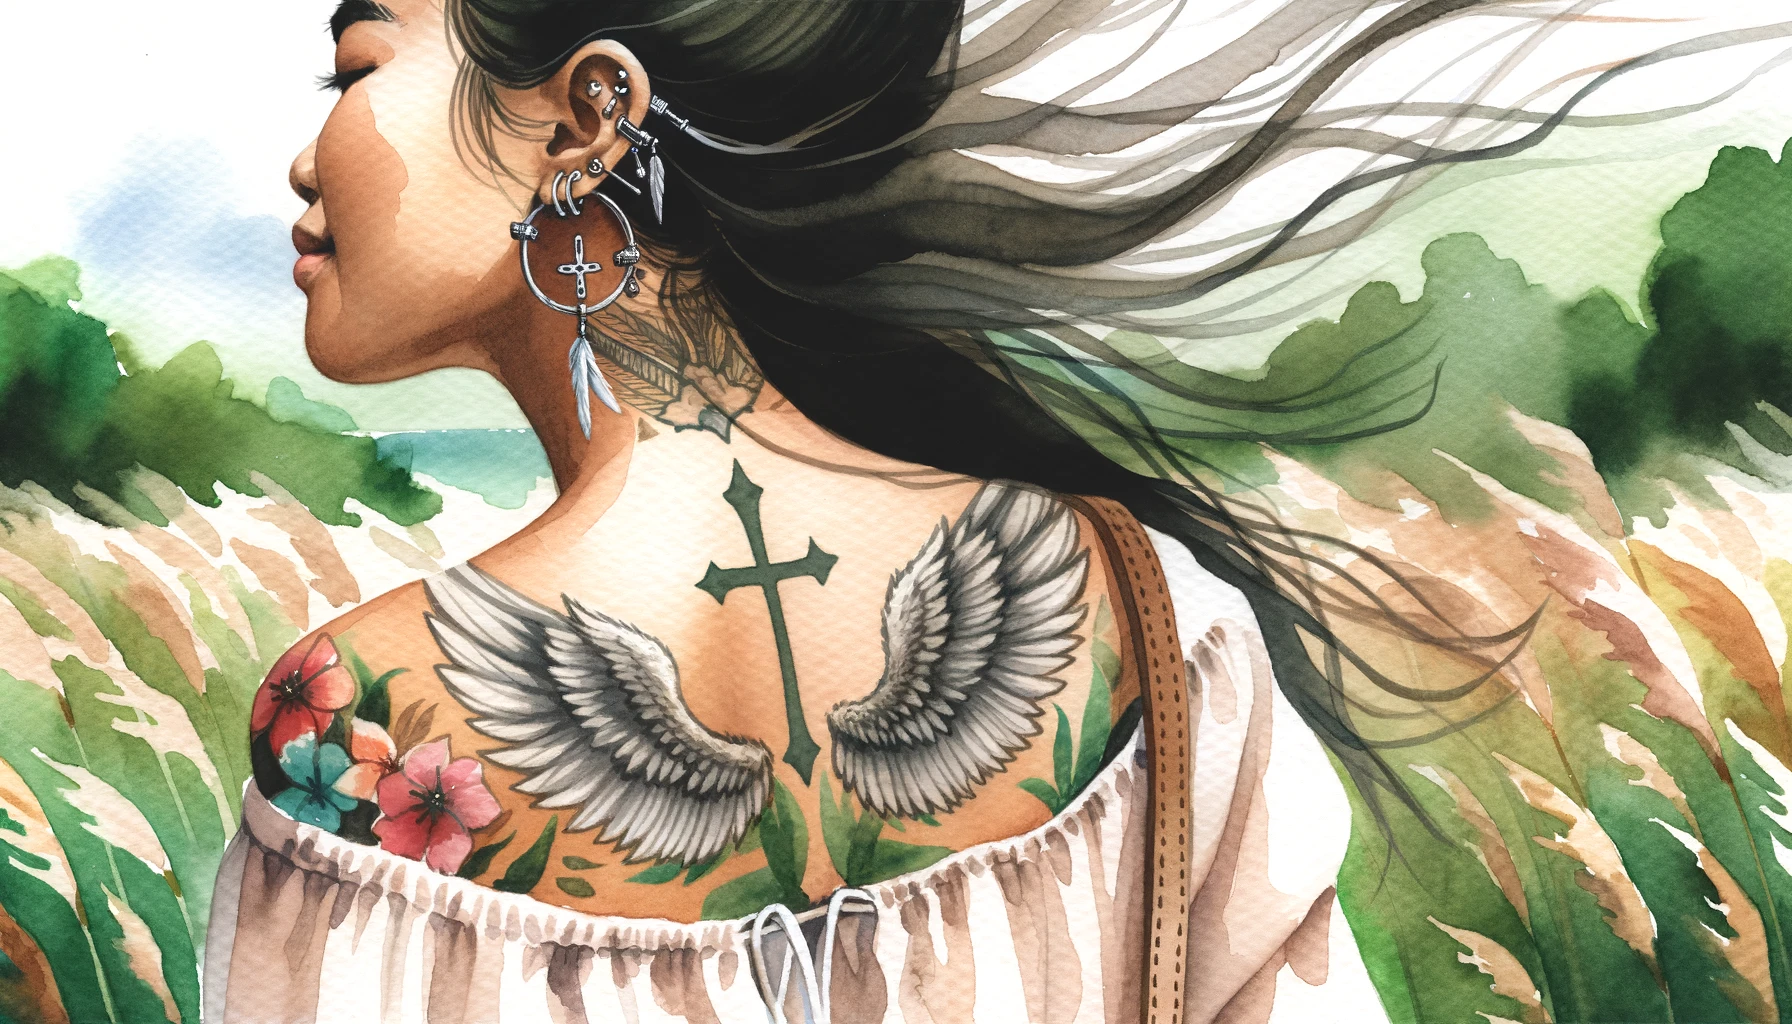 Young Christian woman with a tattoo of an angel's wings on her back. Her ear features multiple piercings, including a cross-shaped earring.